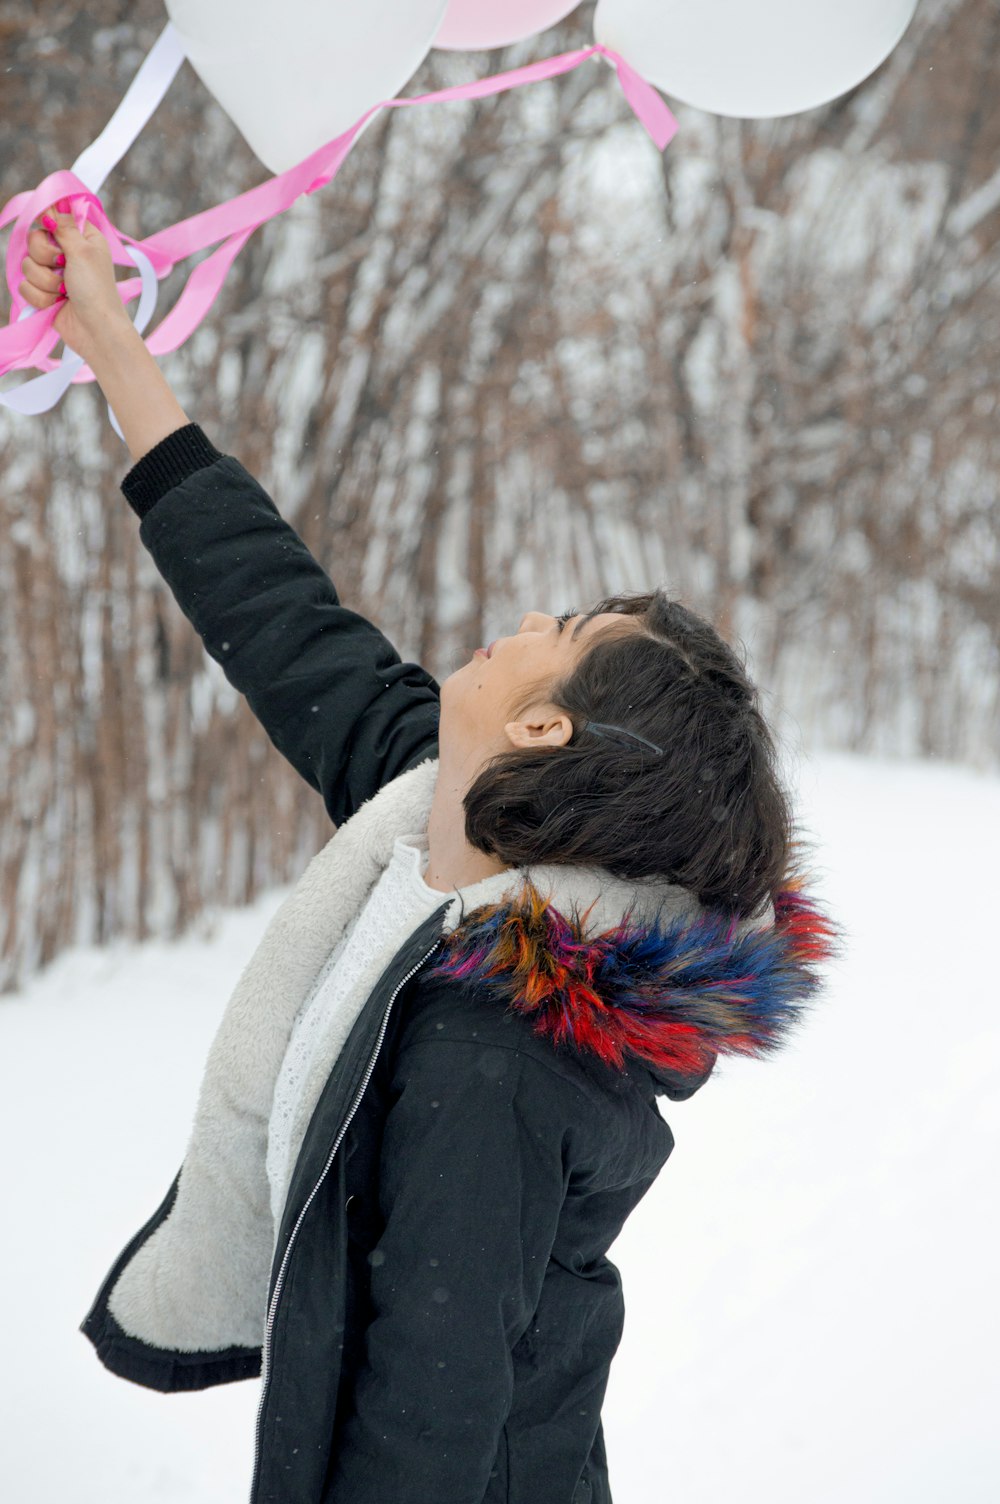 a young boy holding a bunch of balloons in the snow